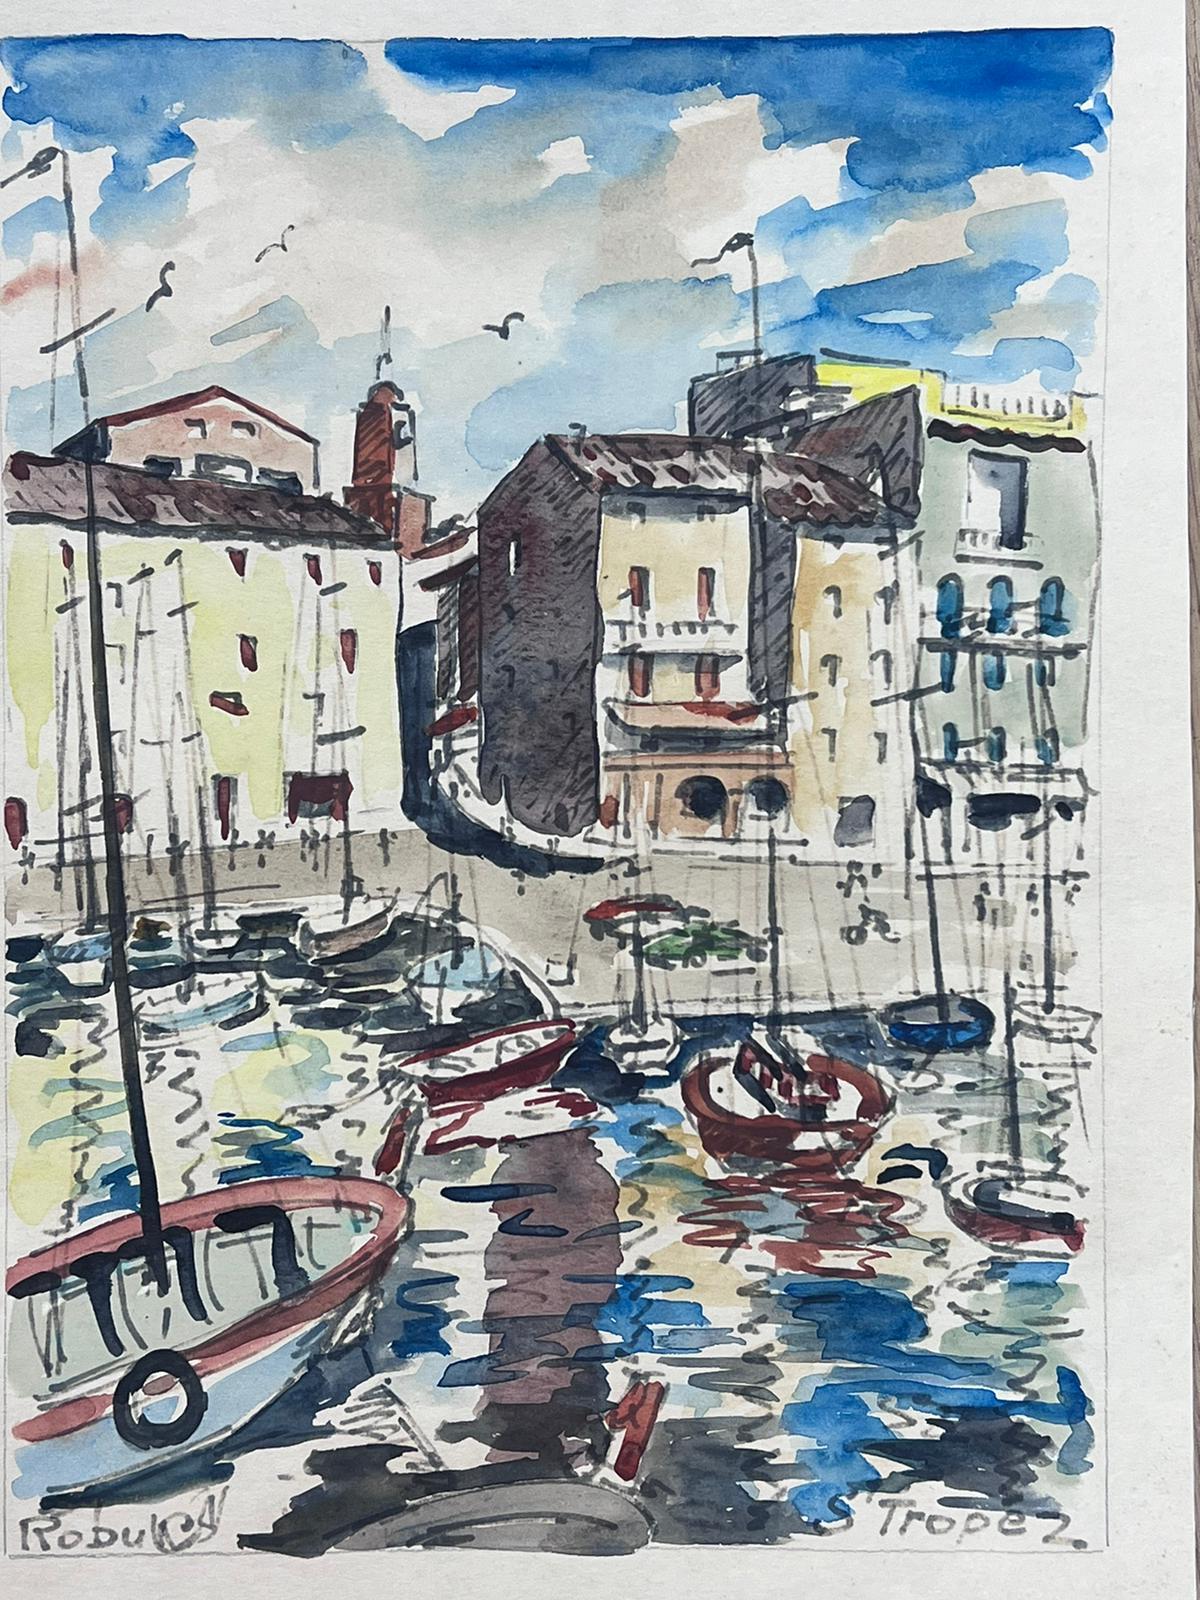 St Tropez Harbour 1960's Original French Watercolor Painting Signed & dated - Art by French School